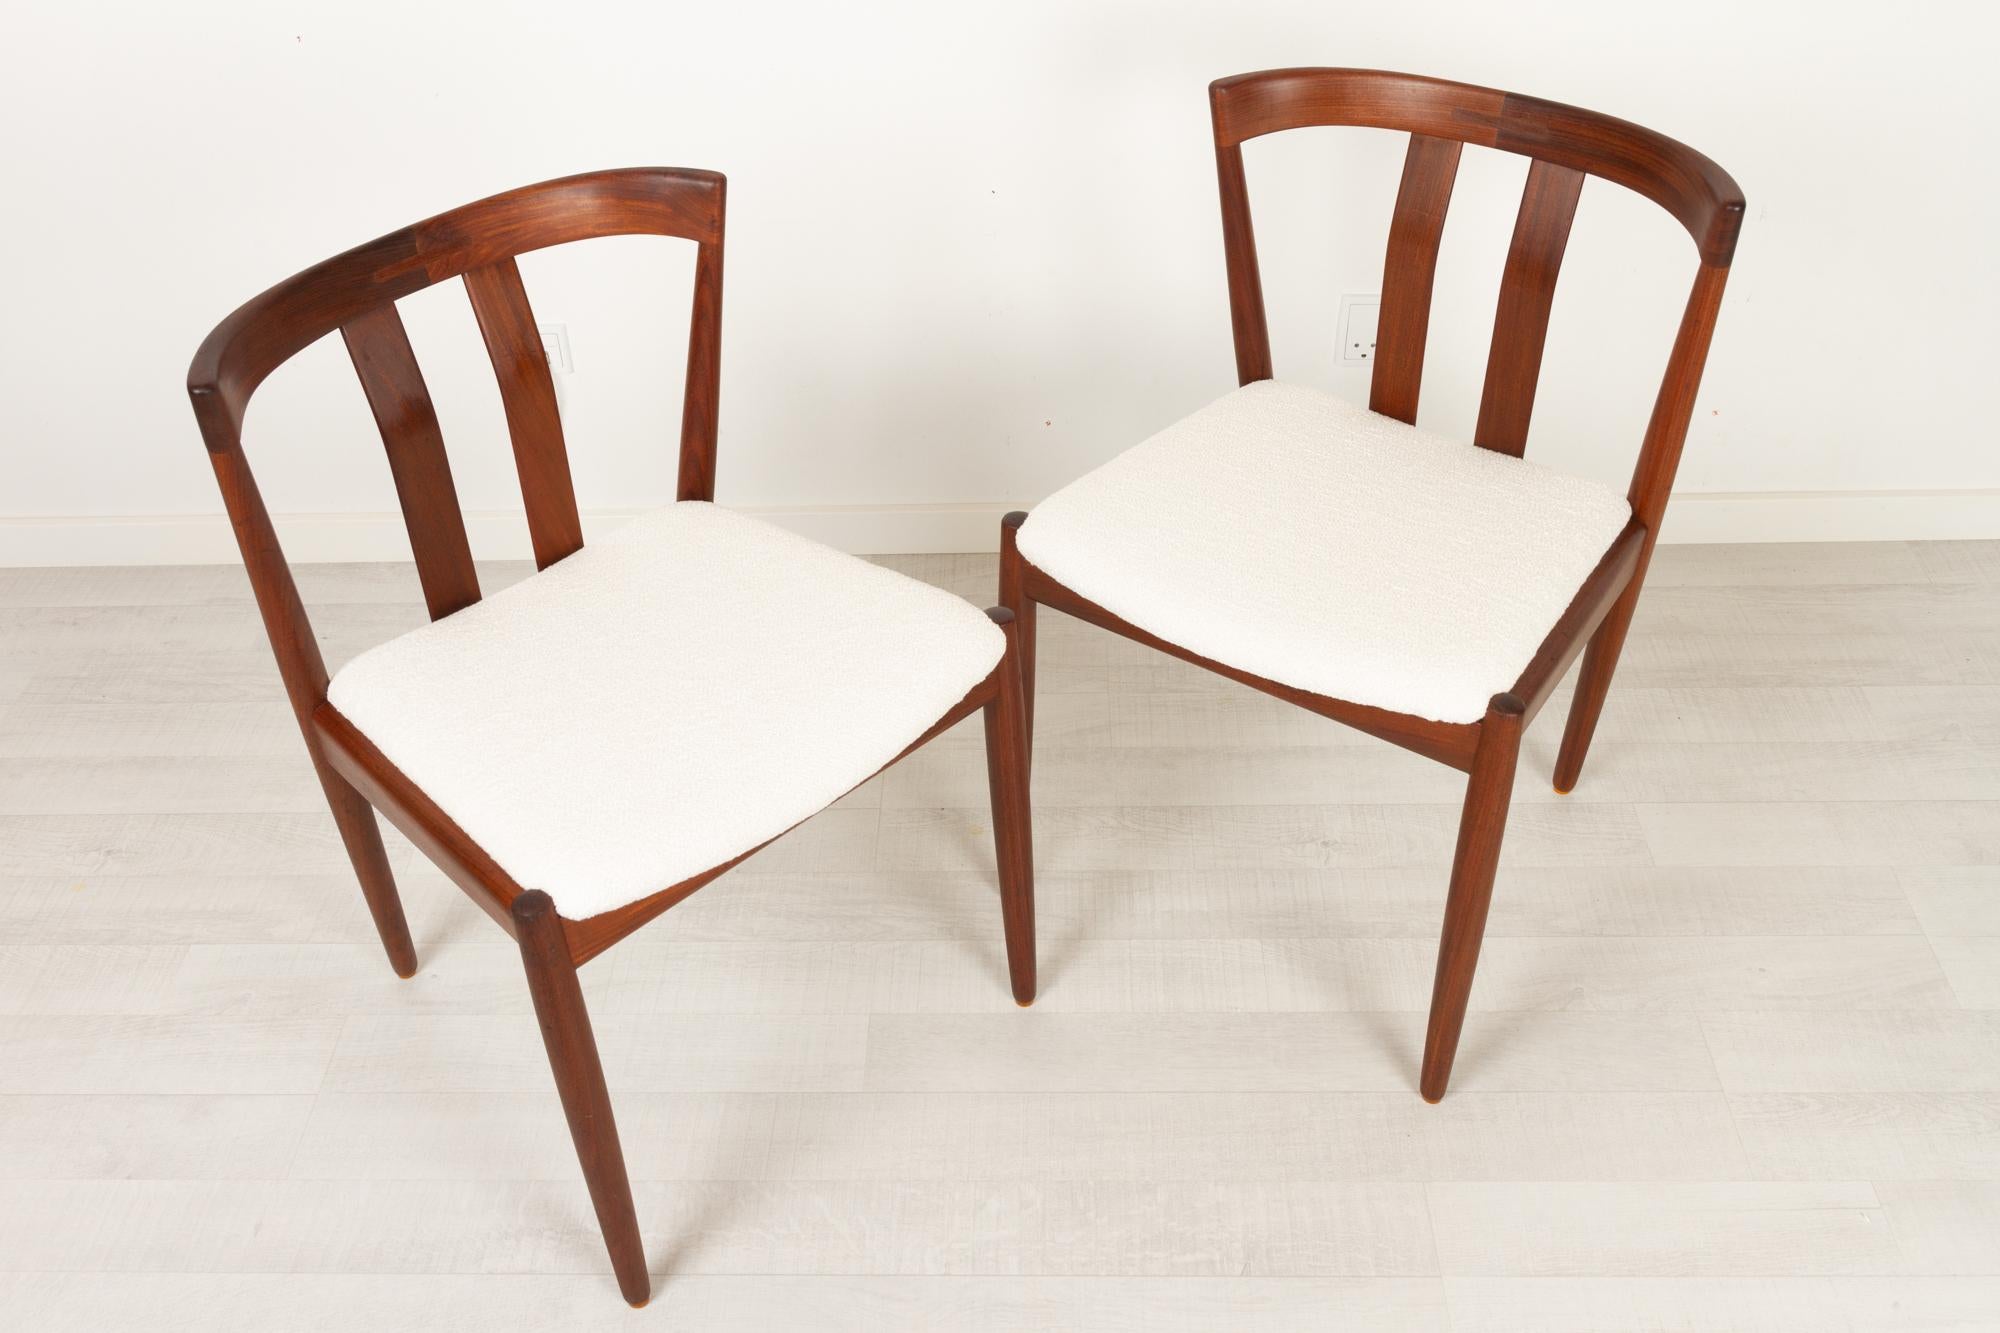 Mid-20th Century Vintage Danish Teak Dining Chairs 1960s, Set of 2 For Sale